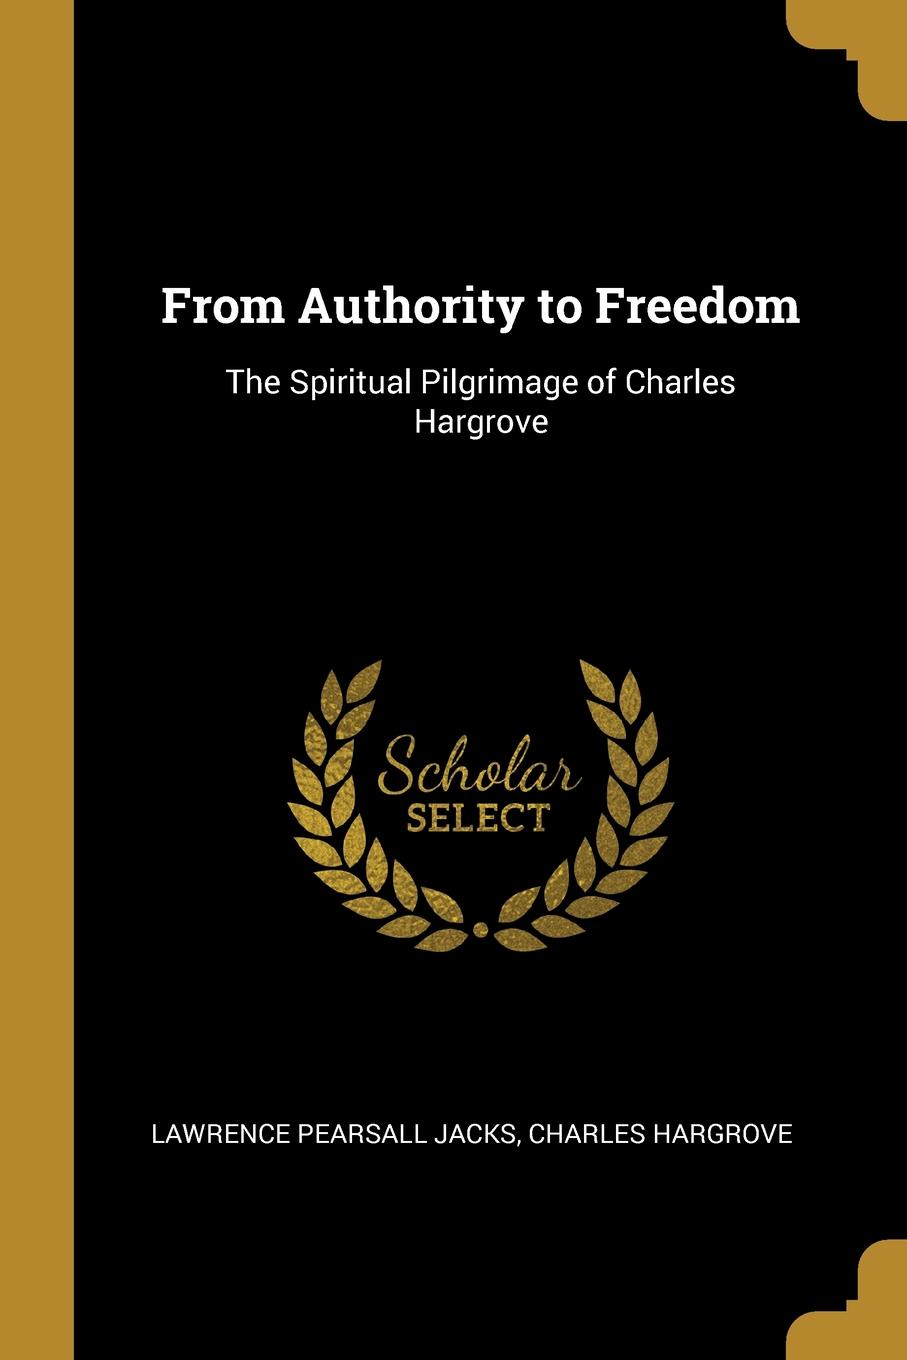 From Authority to Freedom. The Spiritual Pilgrimage of Charles Hargrove